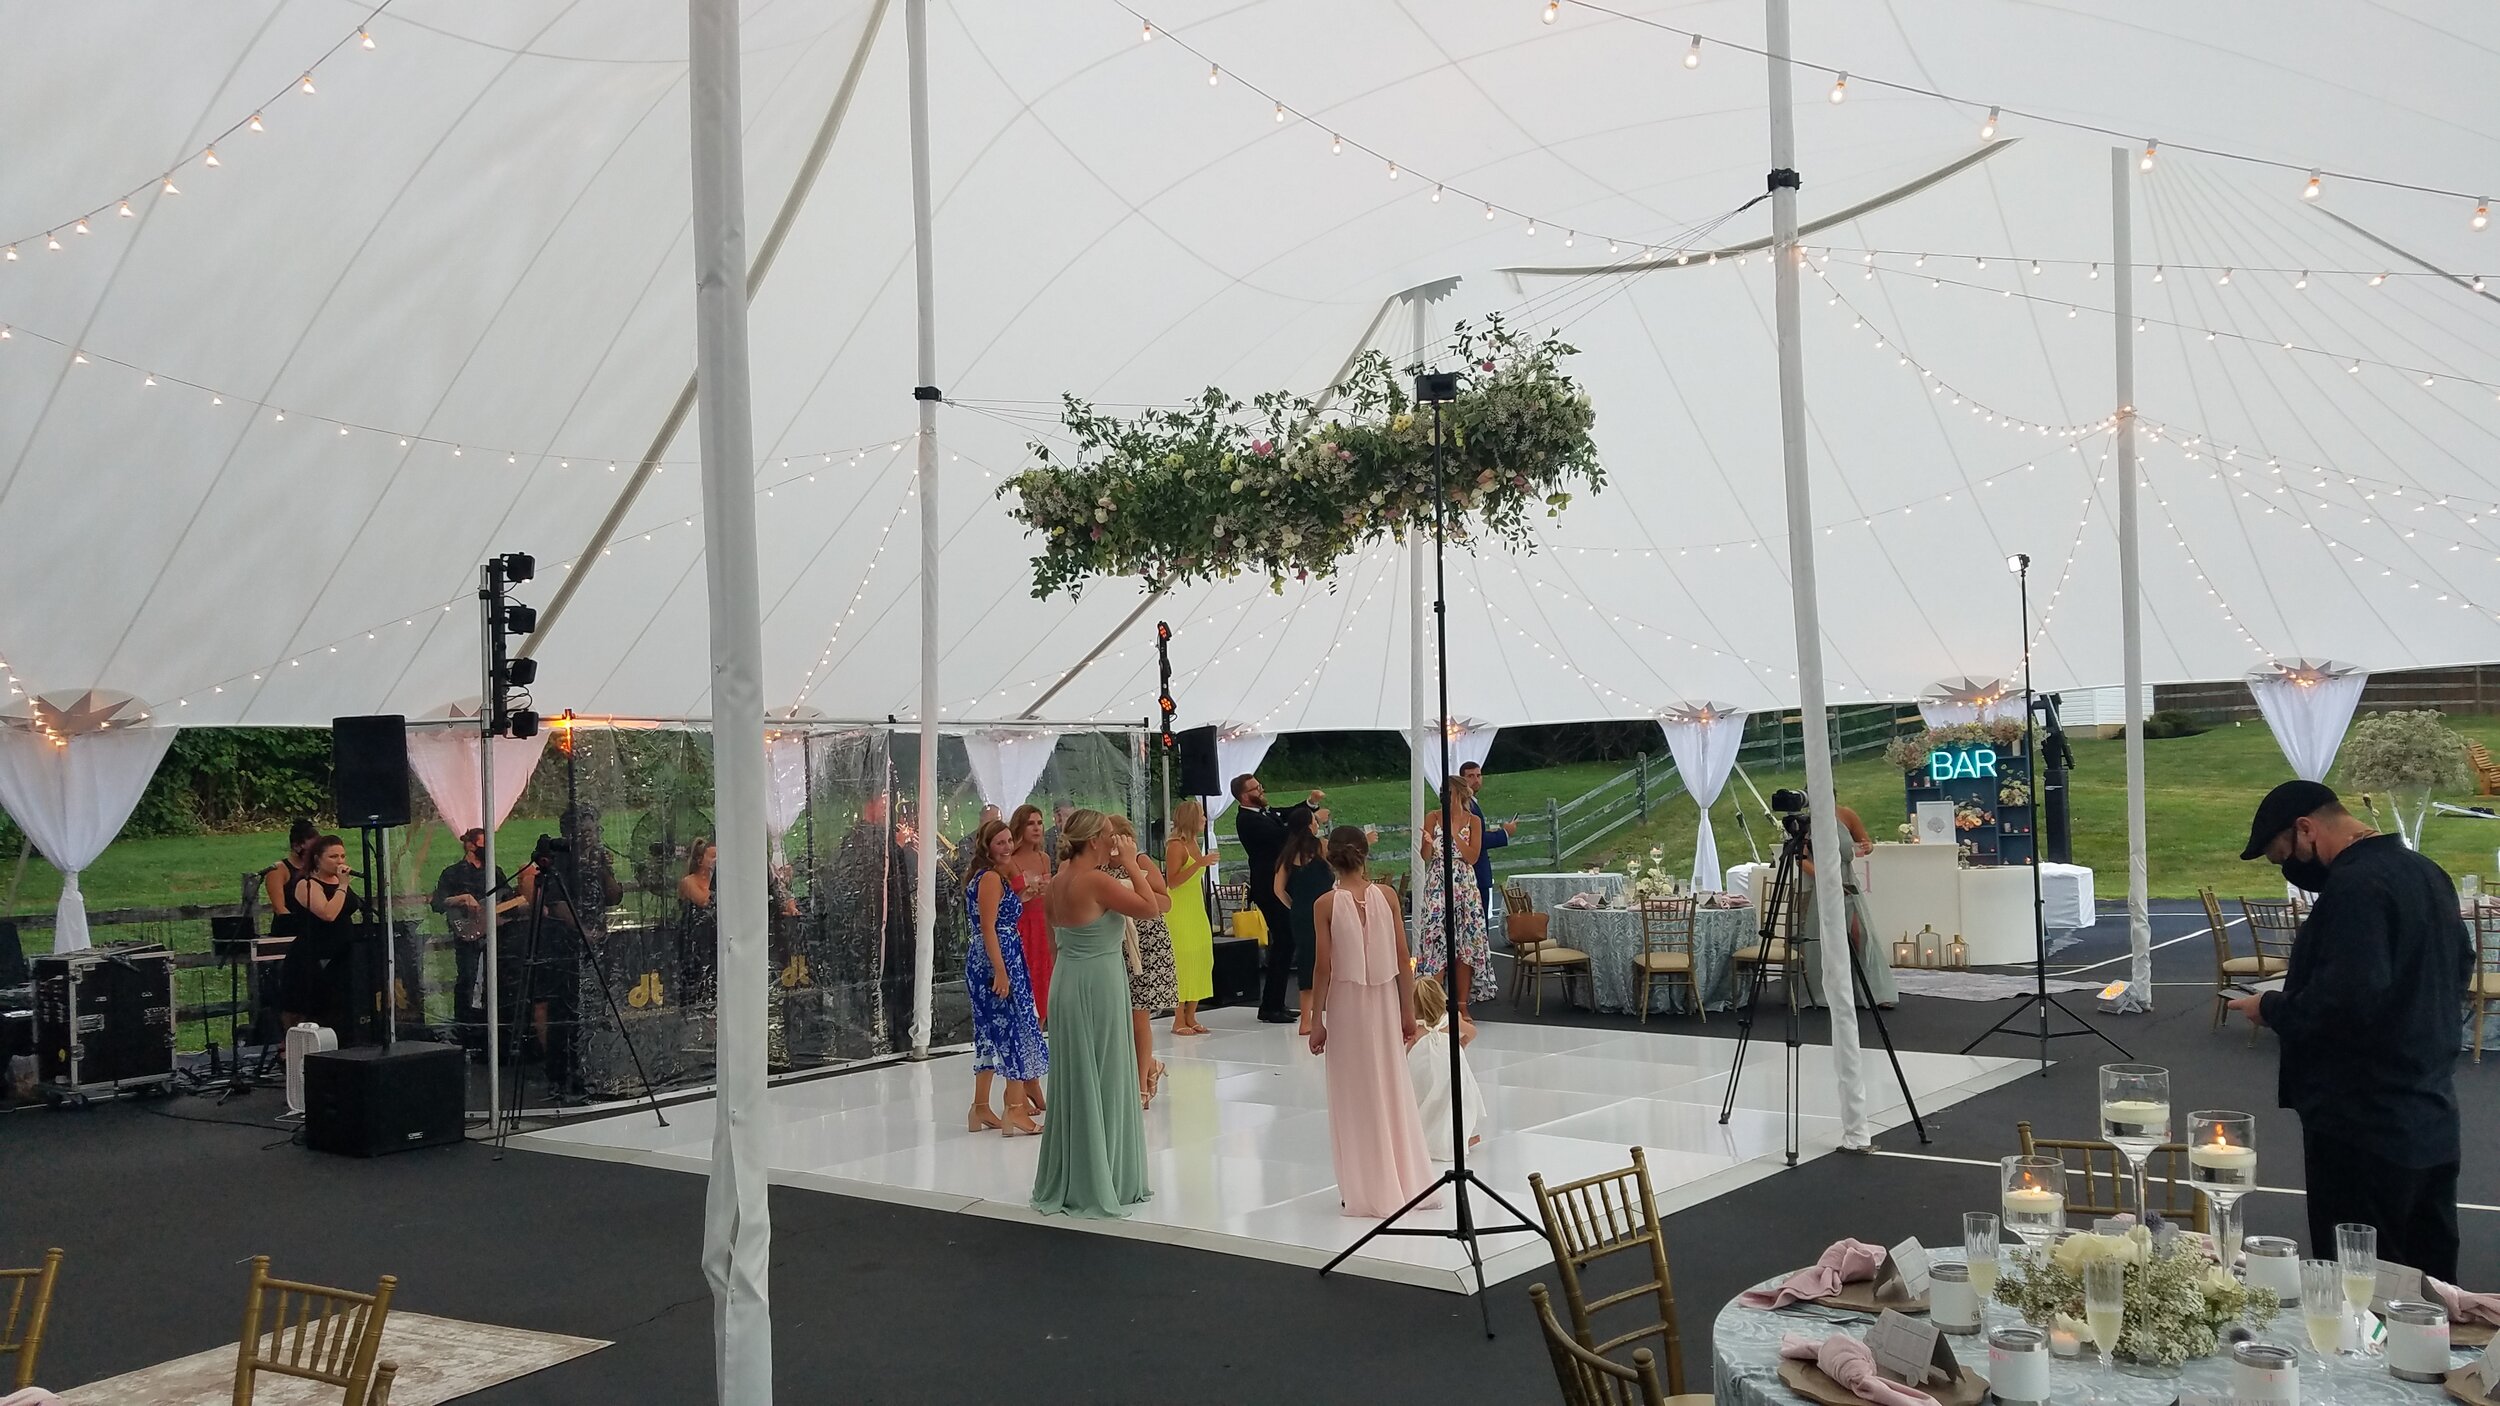 Sailcloth wedding tent with white floor